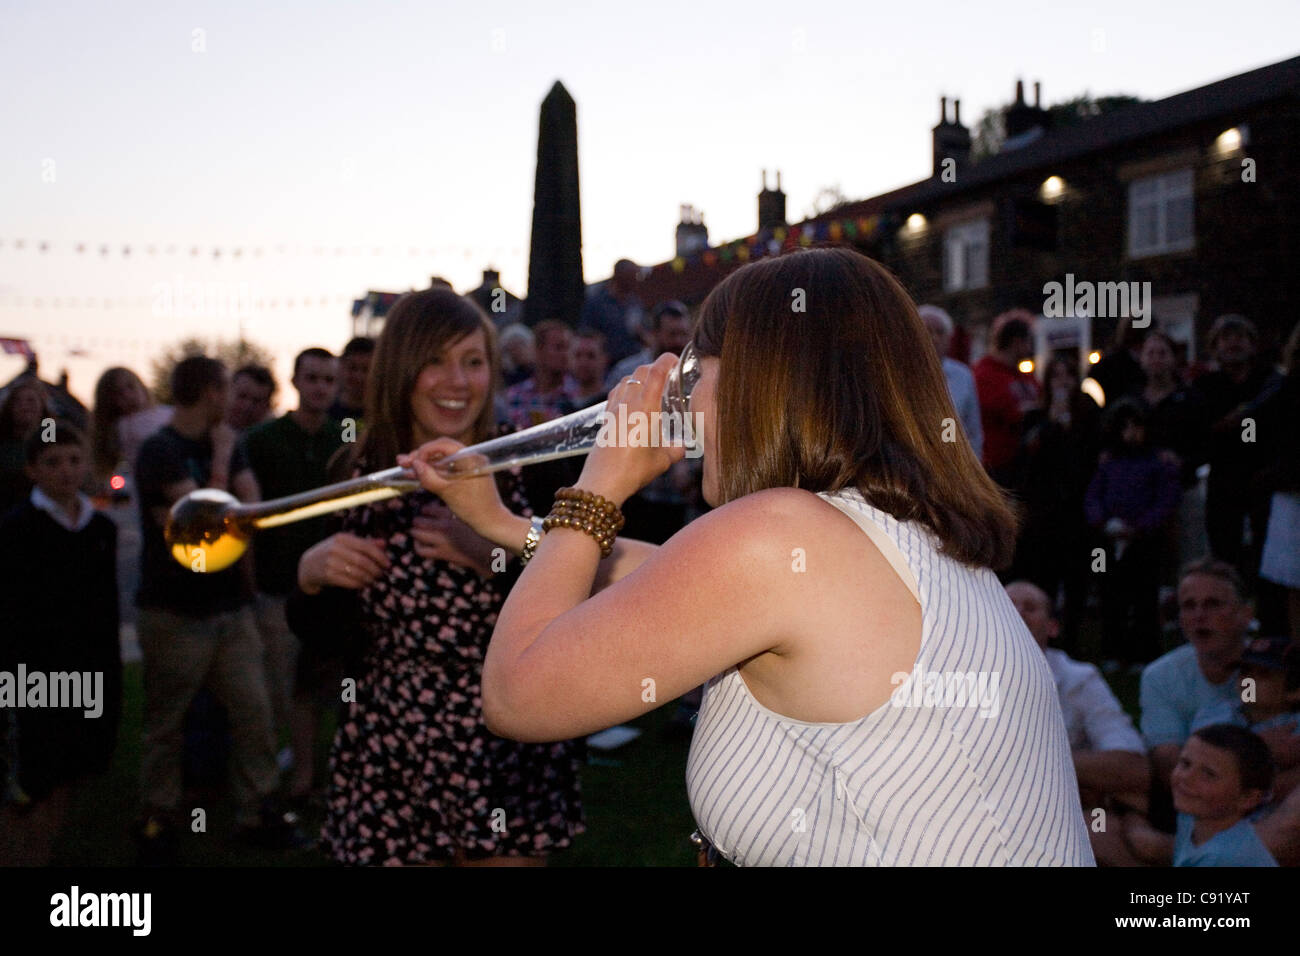 Young Woman Drinking Yard of Ale During Osmotherley Village Summer Games North Yorkshire England Stock Photo